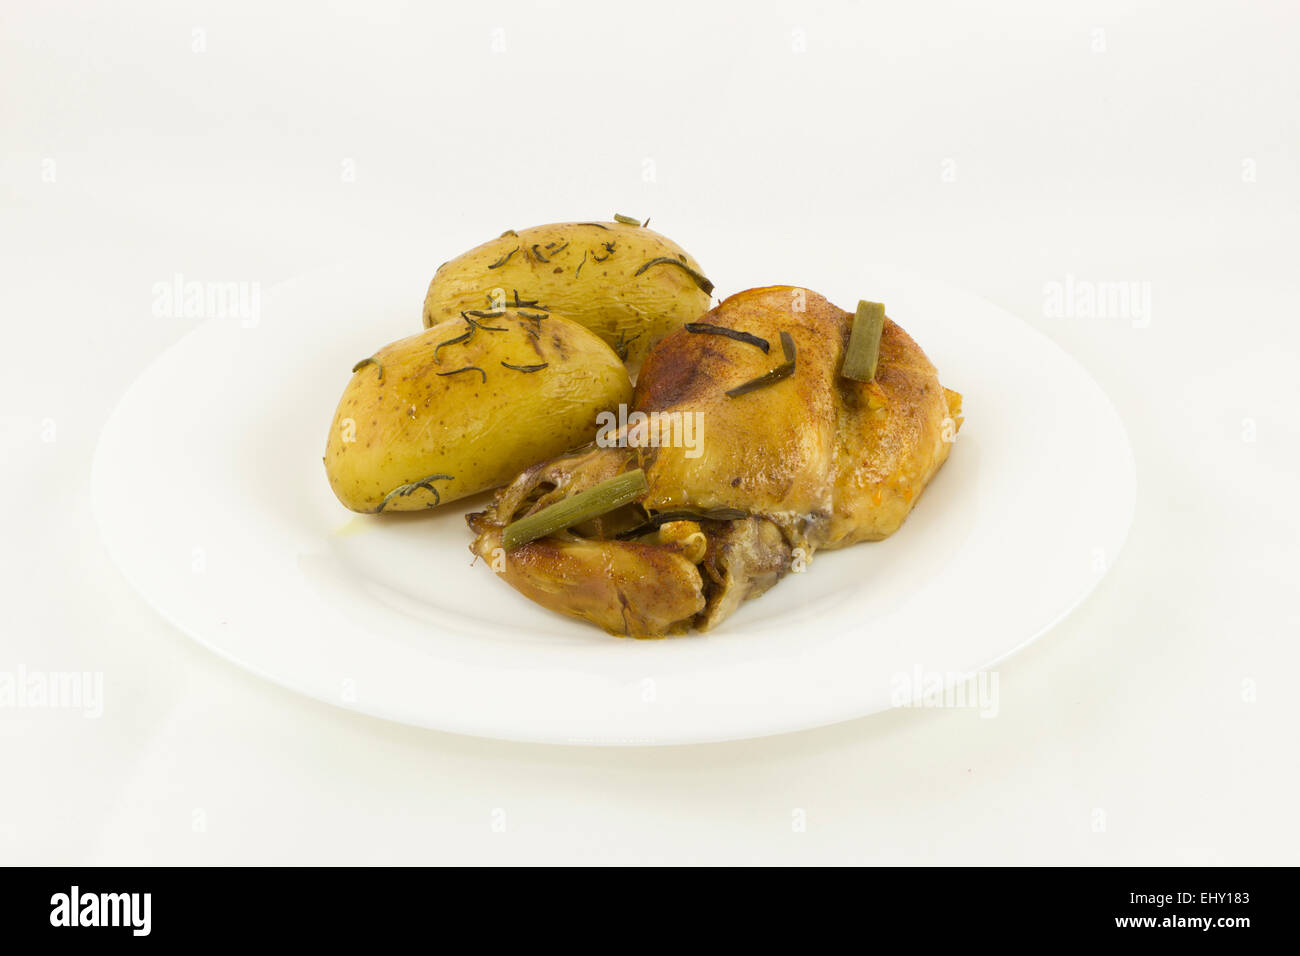 A delicious Rabbit stew and baked potatoes with rosemary Stock Photo